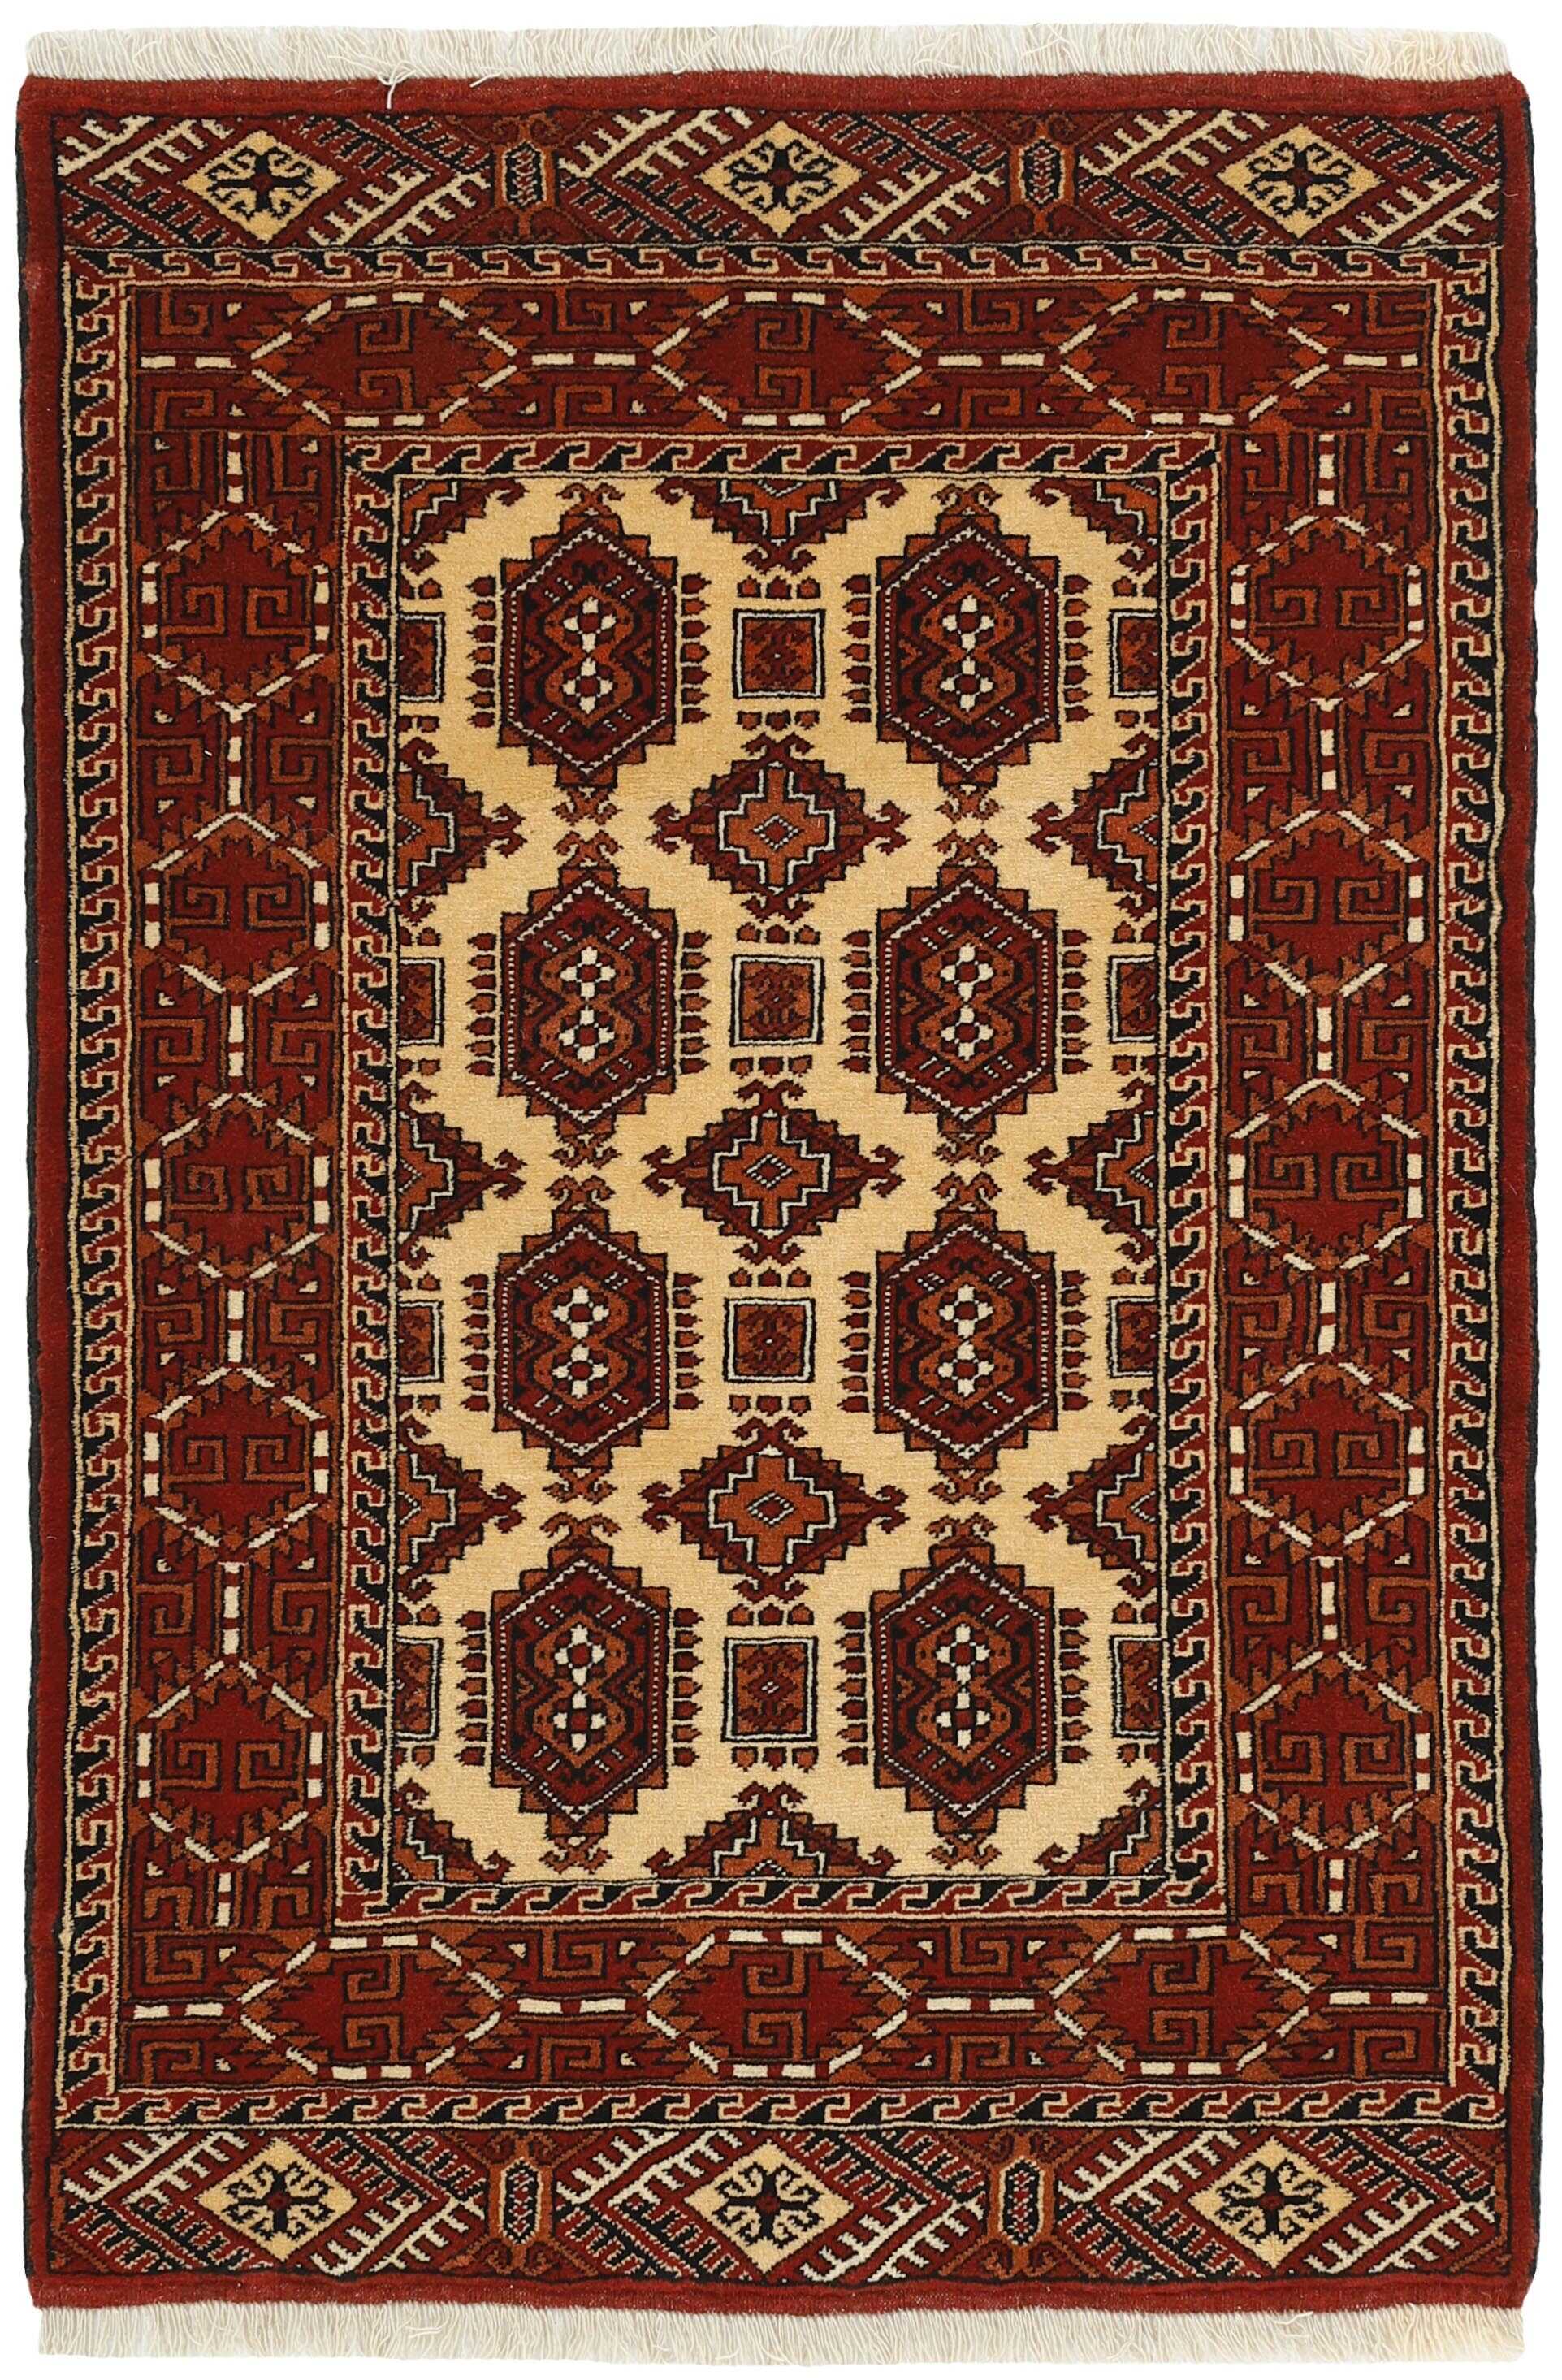 Authentic persian rug with traditional tribal geometric pattern in red and black